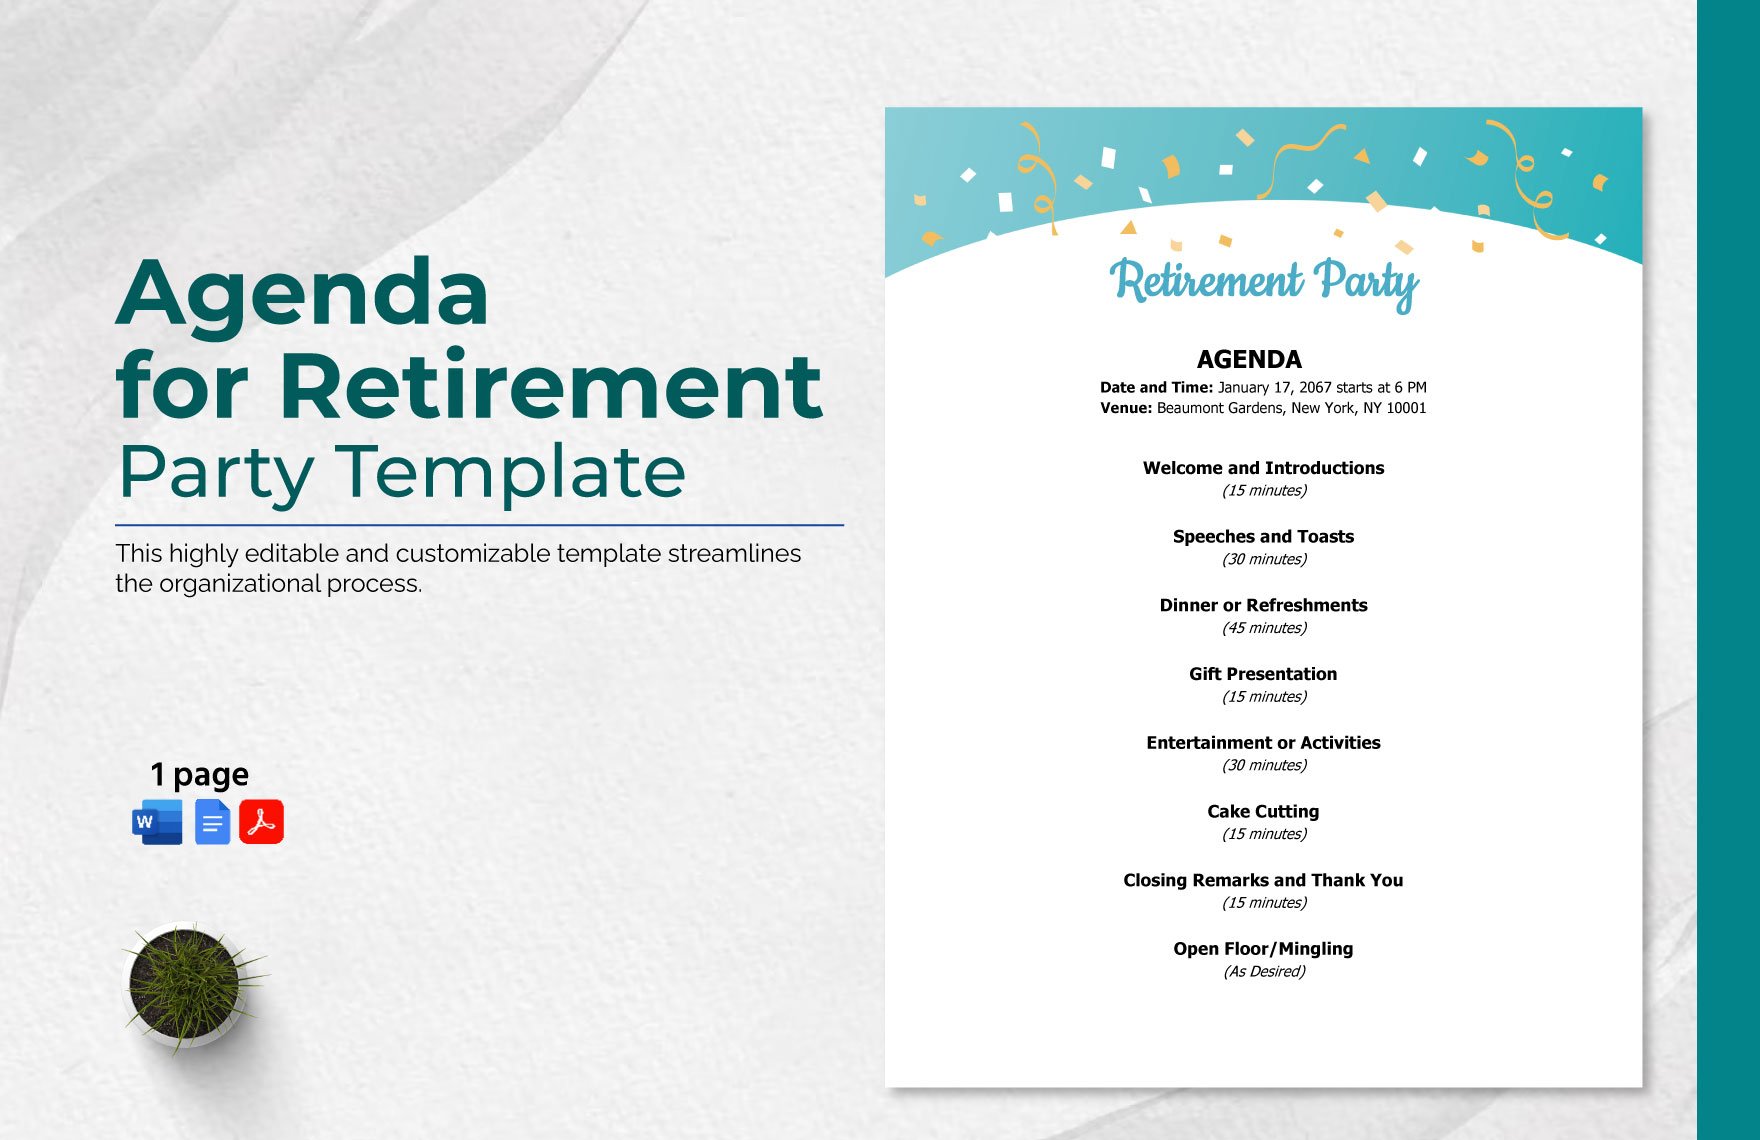 Agenda for Retirement Party Template